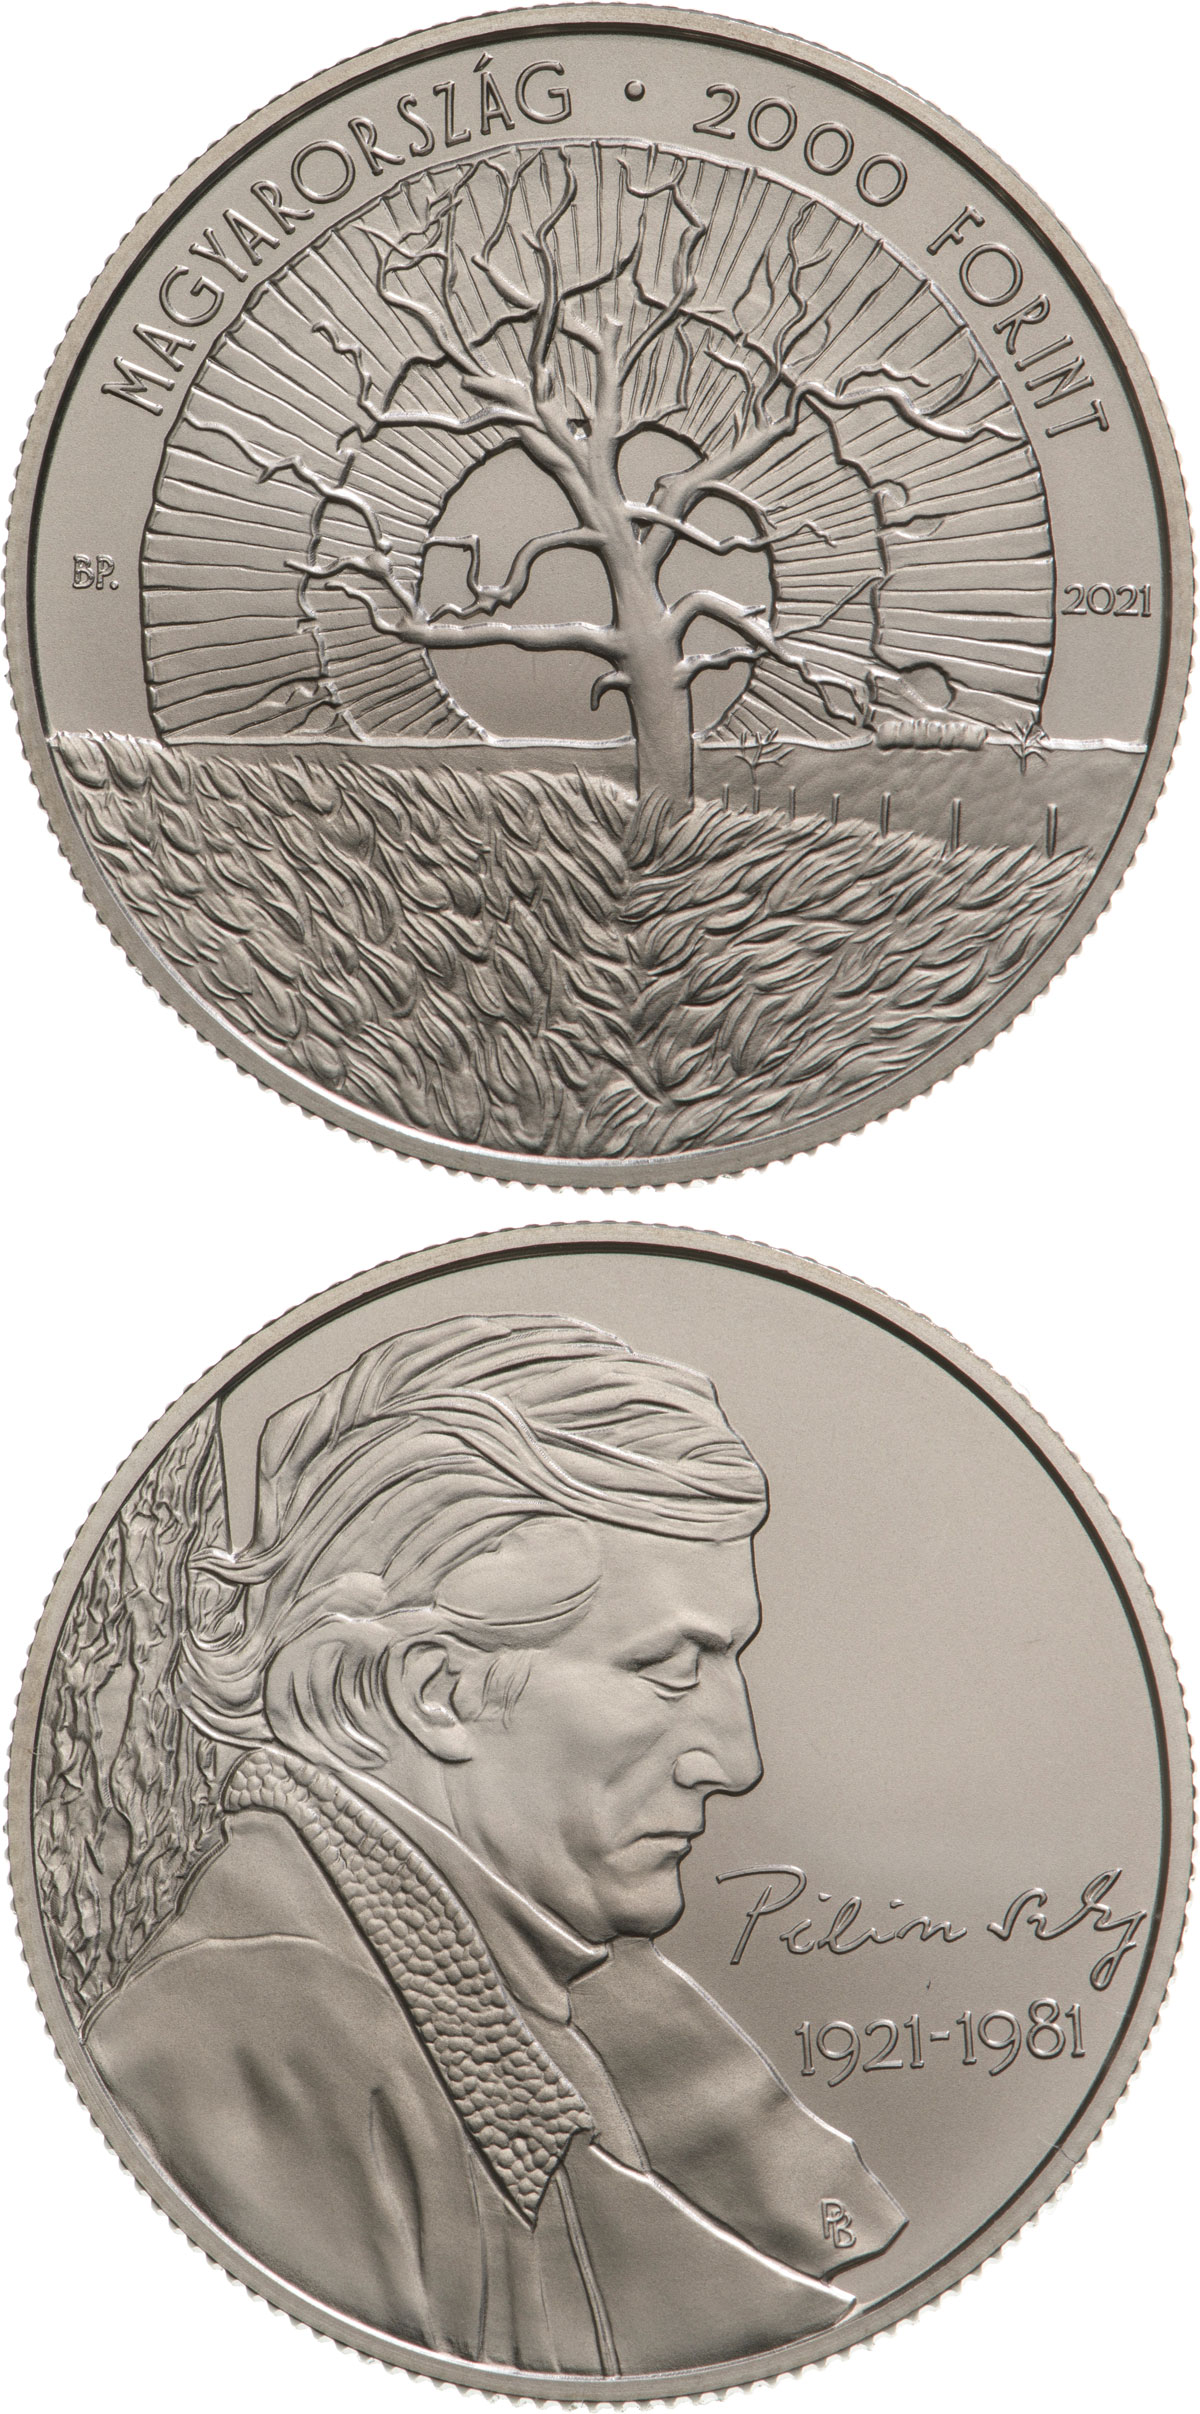 Image of 2000 forint coin - János Pilinszky | Hungary 2021.  The Copper–Nickel (CuNi) coin is of BU quality.